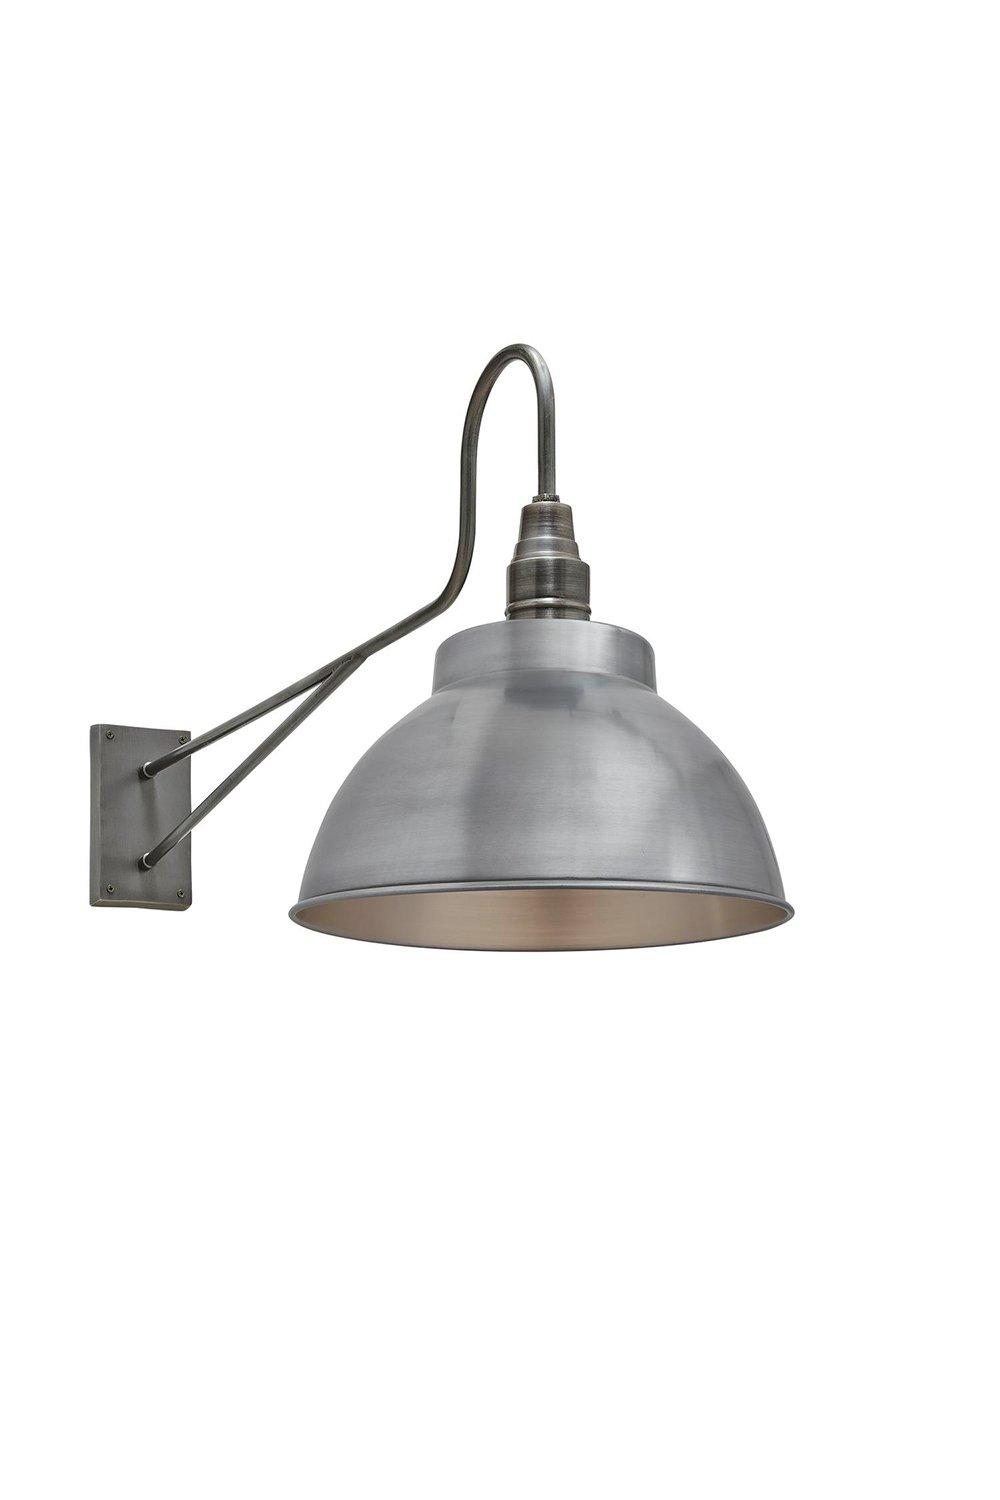 Long Arm Dome Wall Light, 13 Inch, Light Pewter, Pewter Holder